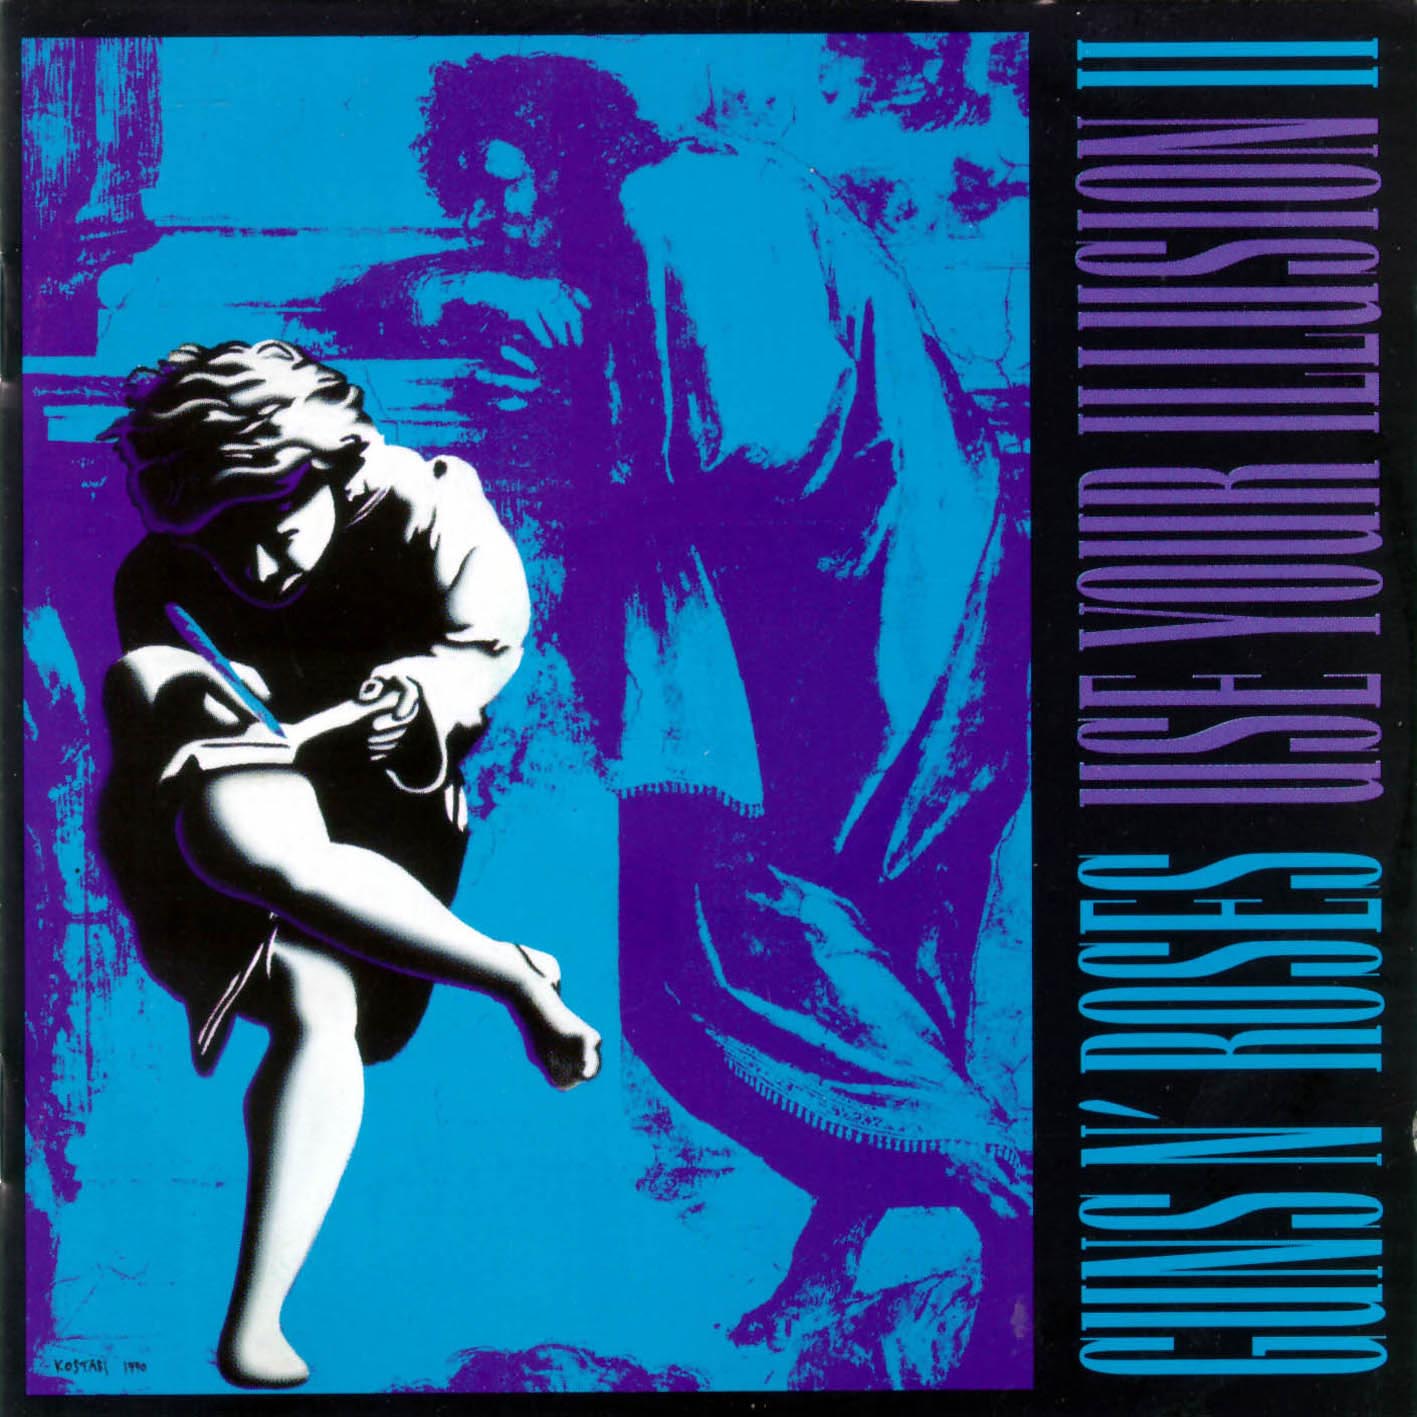 CD Guns N Roses - Use your illusion II